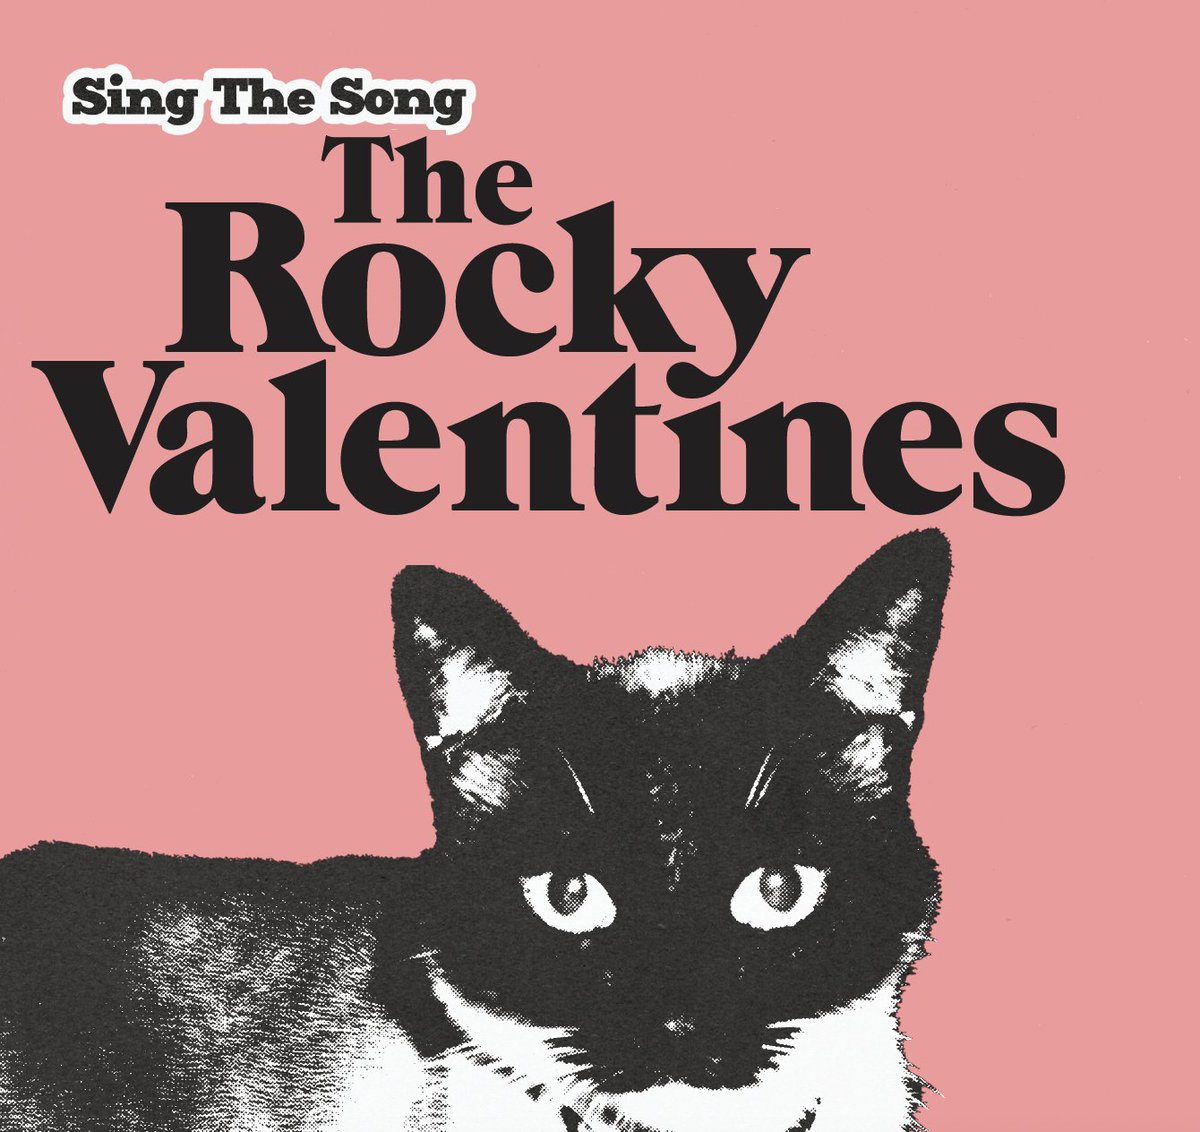 The Rocky Valentines single is now on all platforms. Stream it wherever you like : open.spotify.com/album/6HykHLQ7…